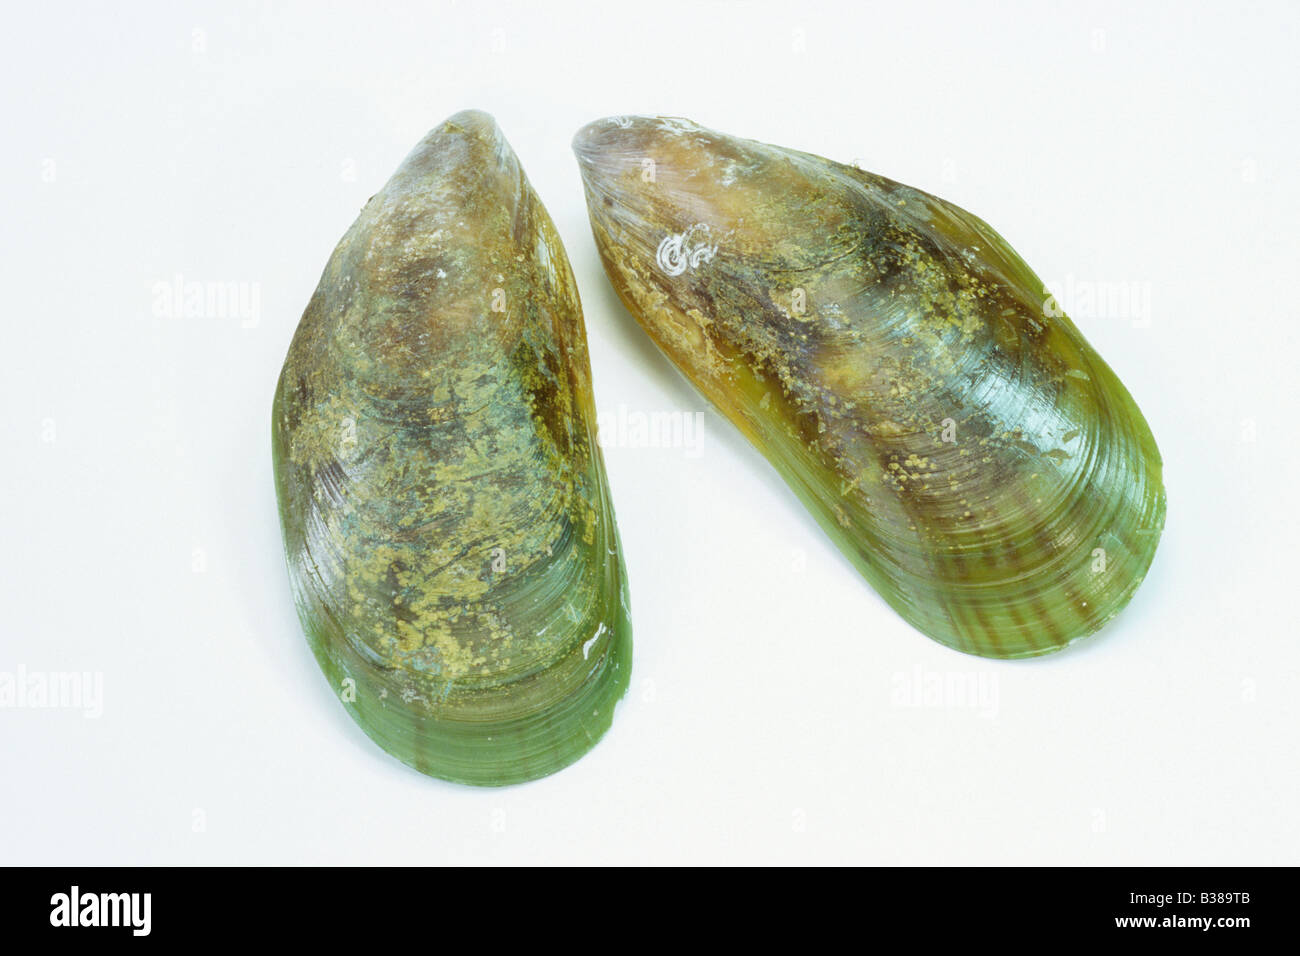 Greenshell Mussel, New Zealand Mussel, Channel Mussel (Perna canaliculus), studio picture Stock Photo